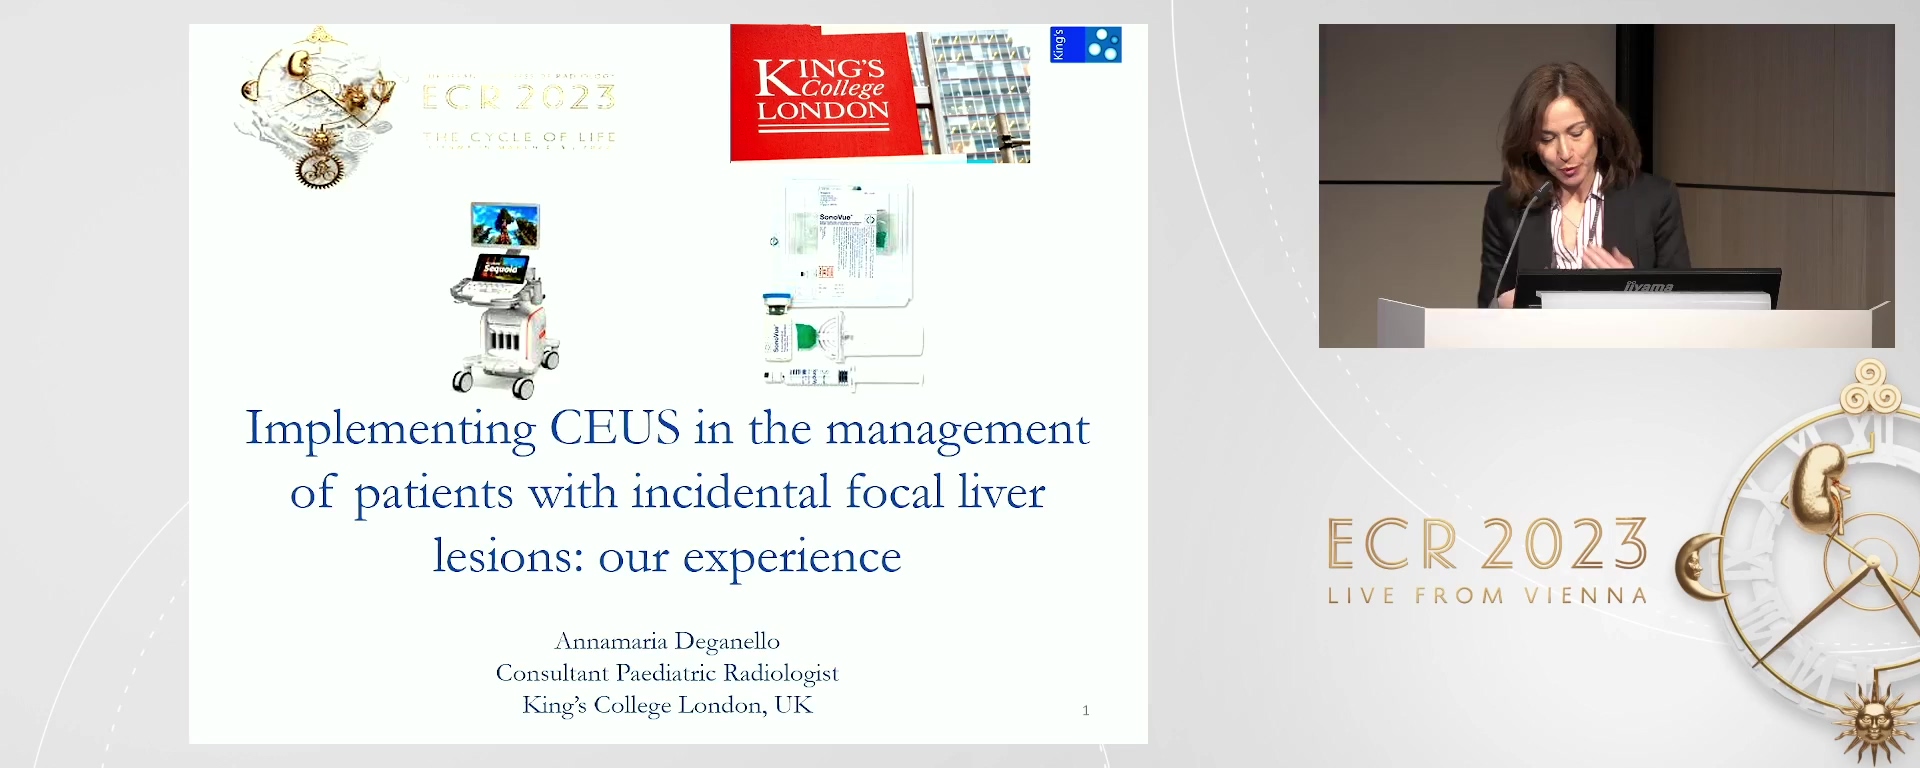 Implementing CEUS in the management of patients with incidental focal liver lesions: our experience